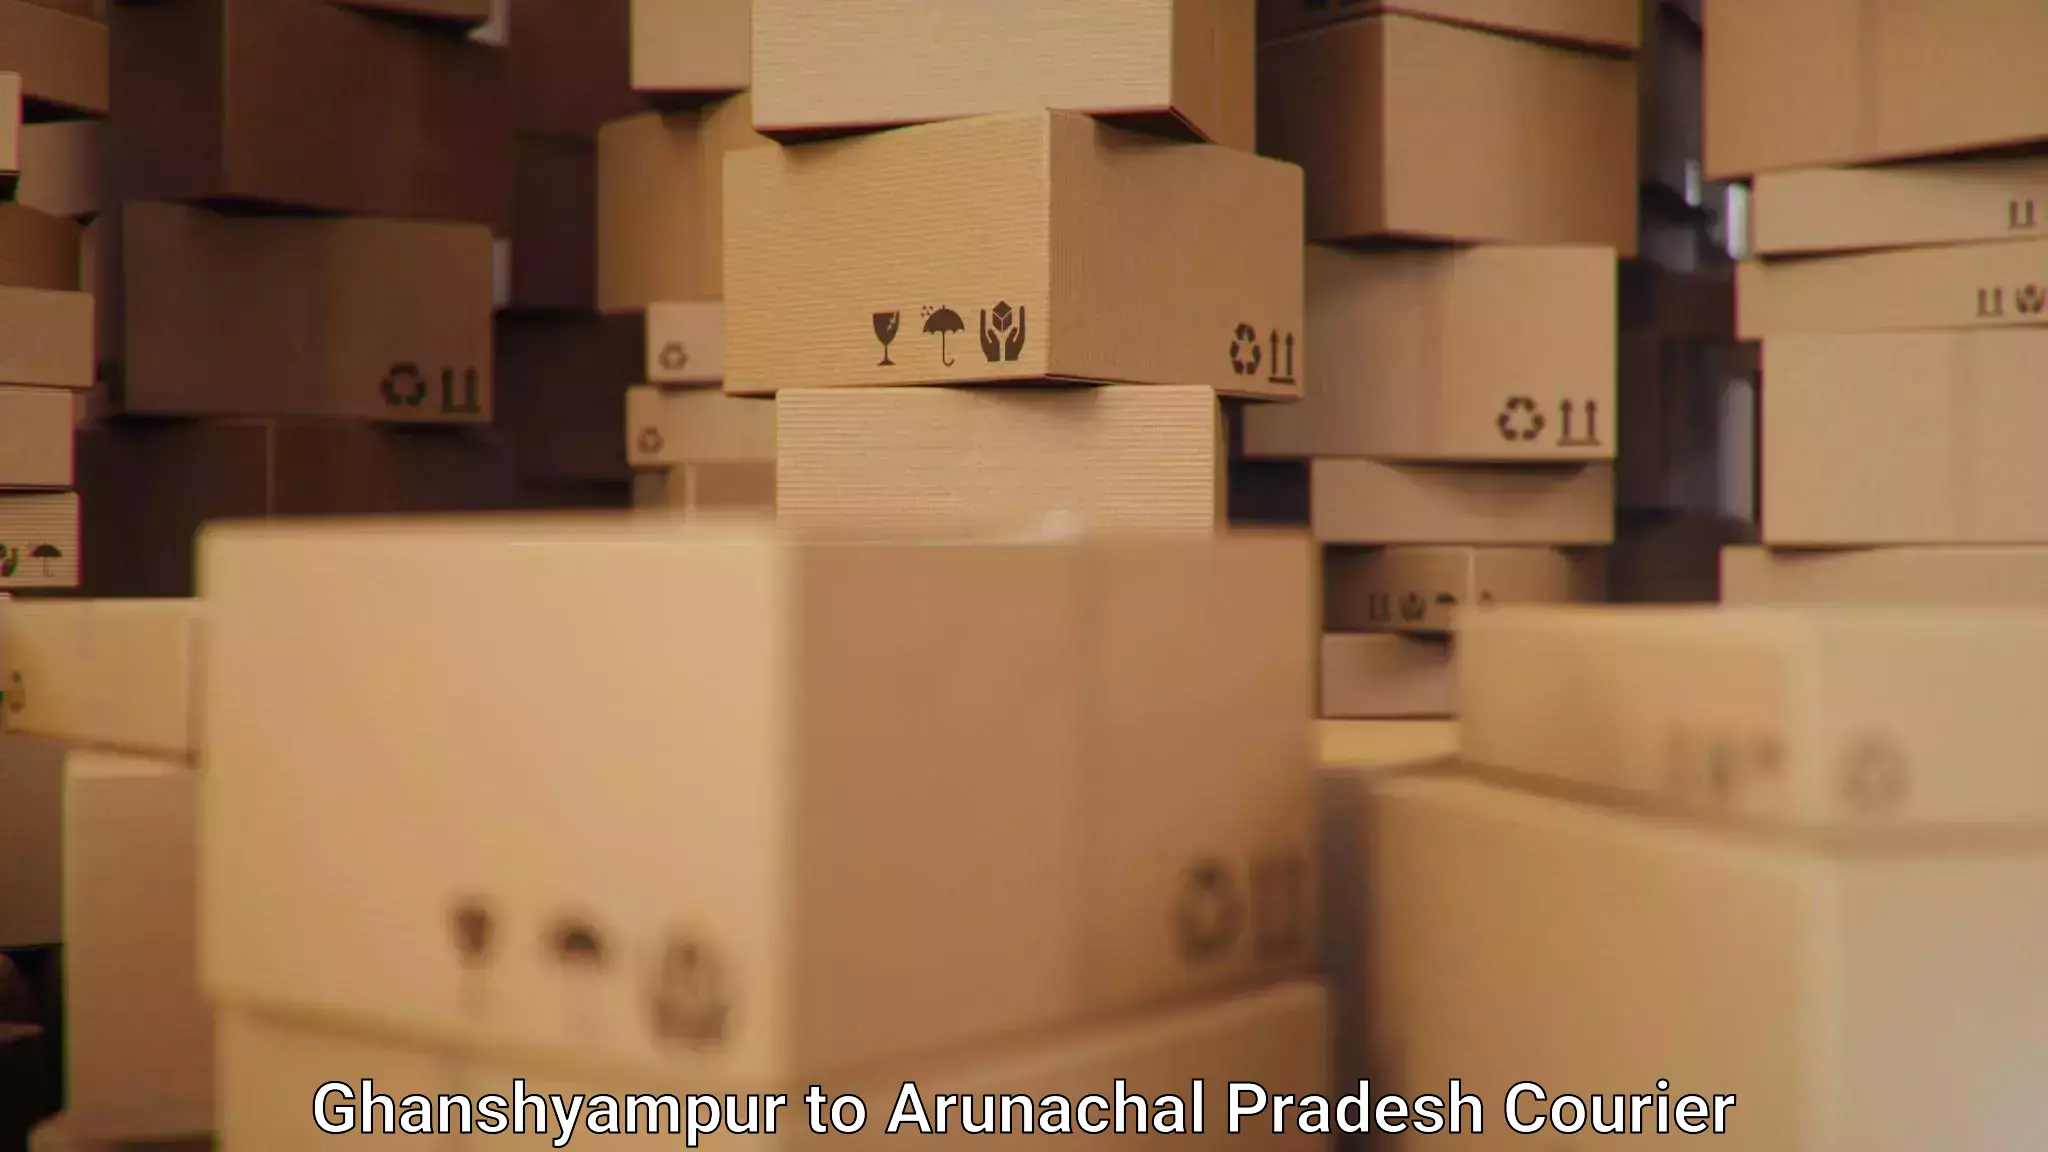 Automated parcel services Ghanshyampur to Chowkham